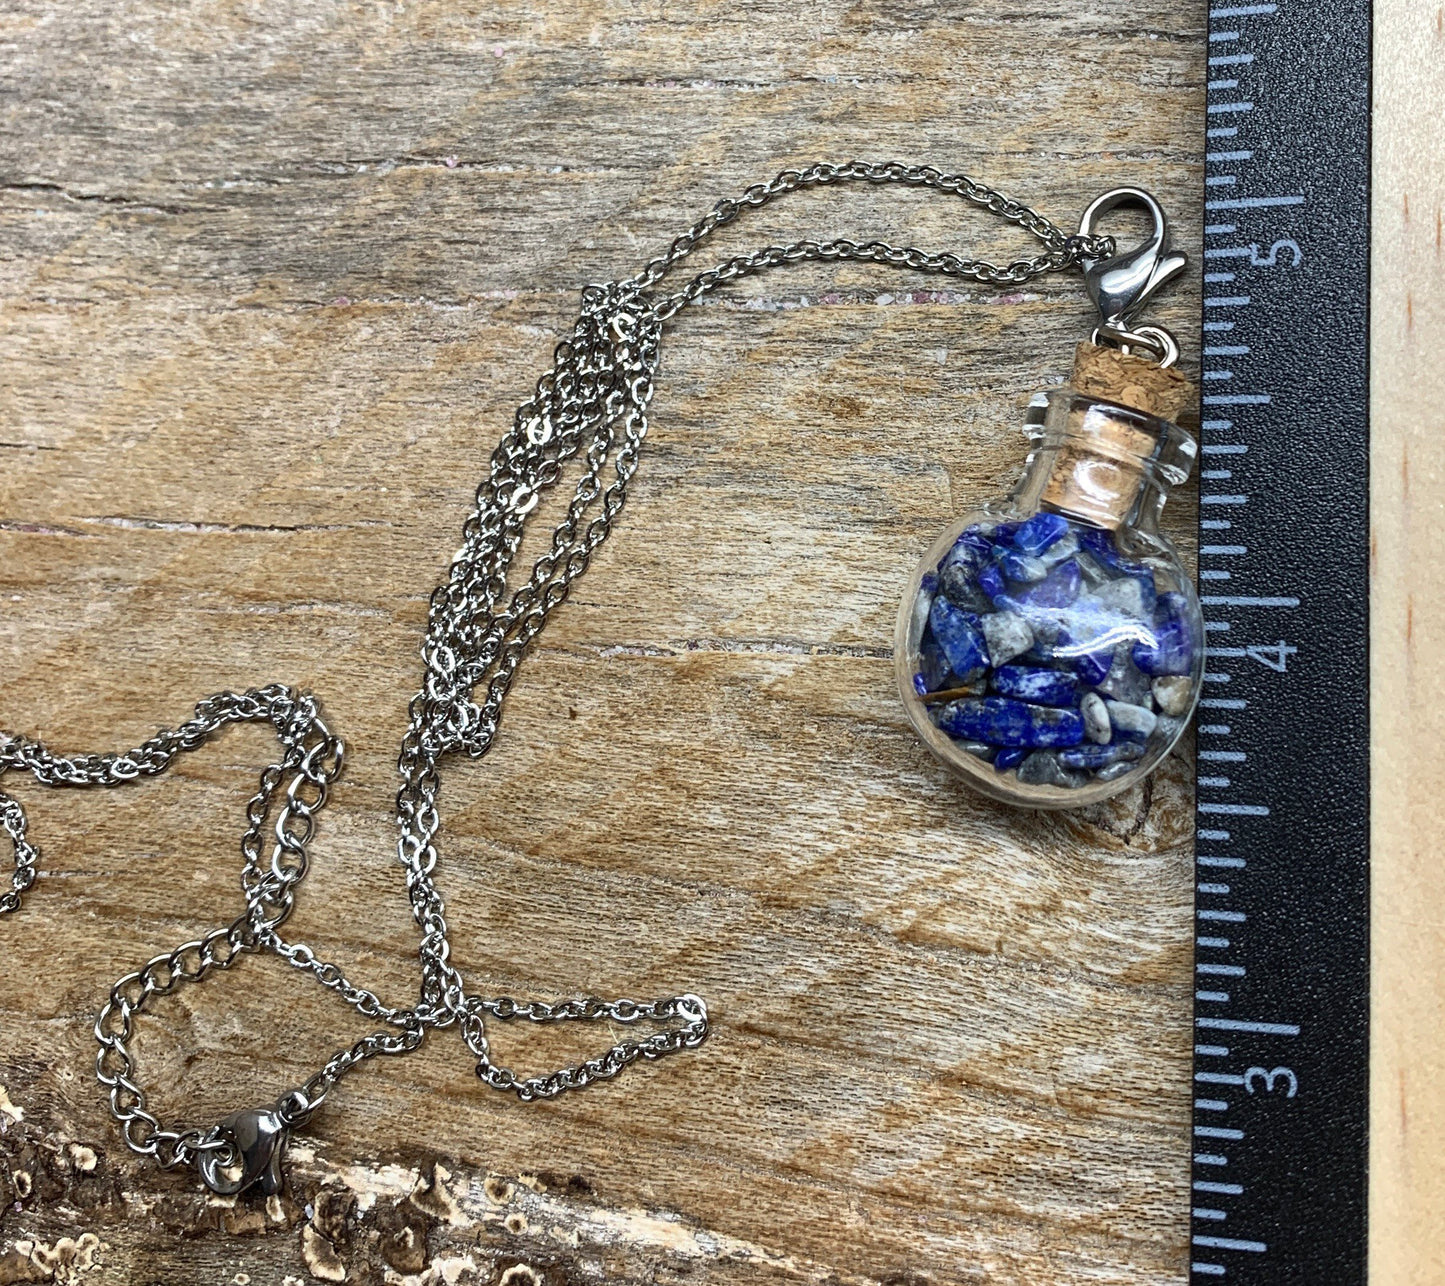 Lapis Lazuli Necklace in Corked Bottle, 24” Chain 1148